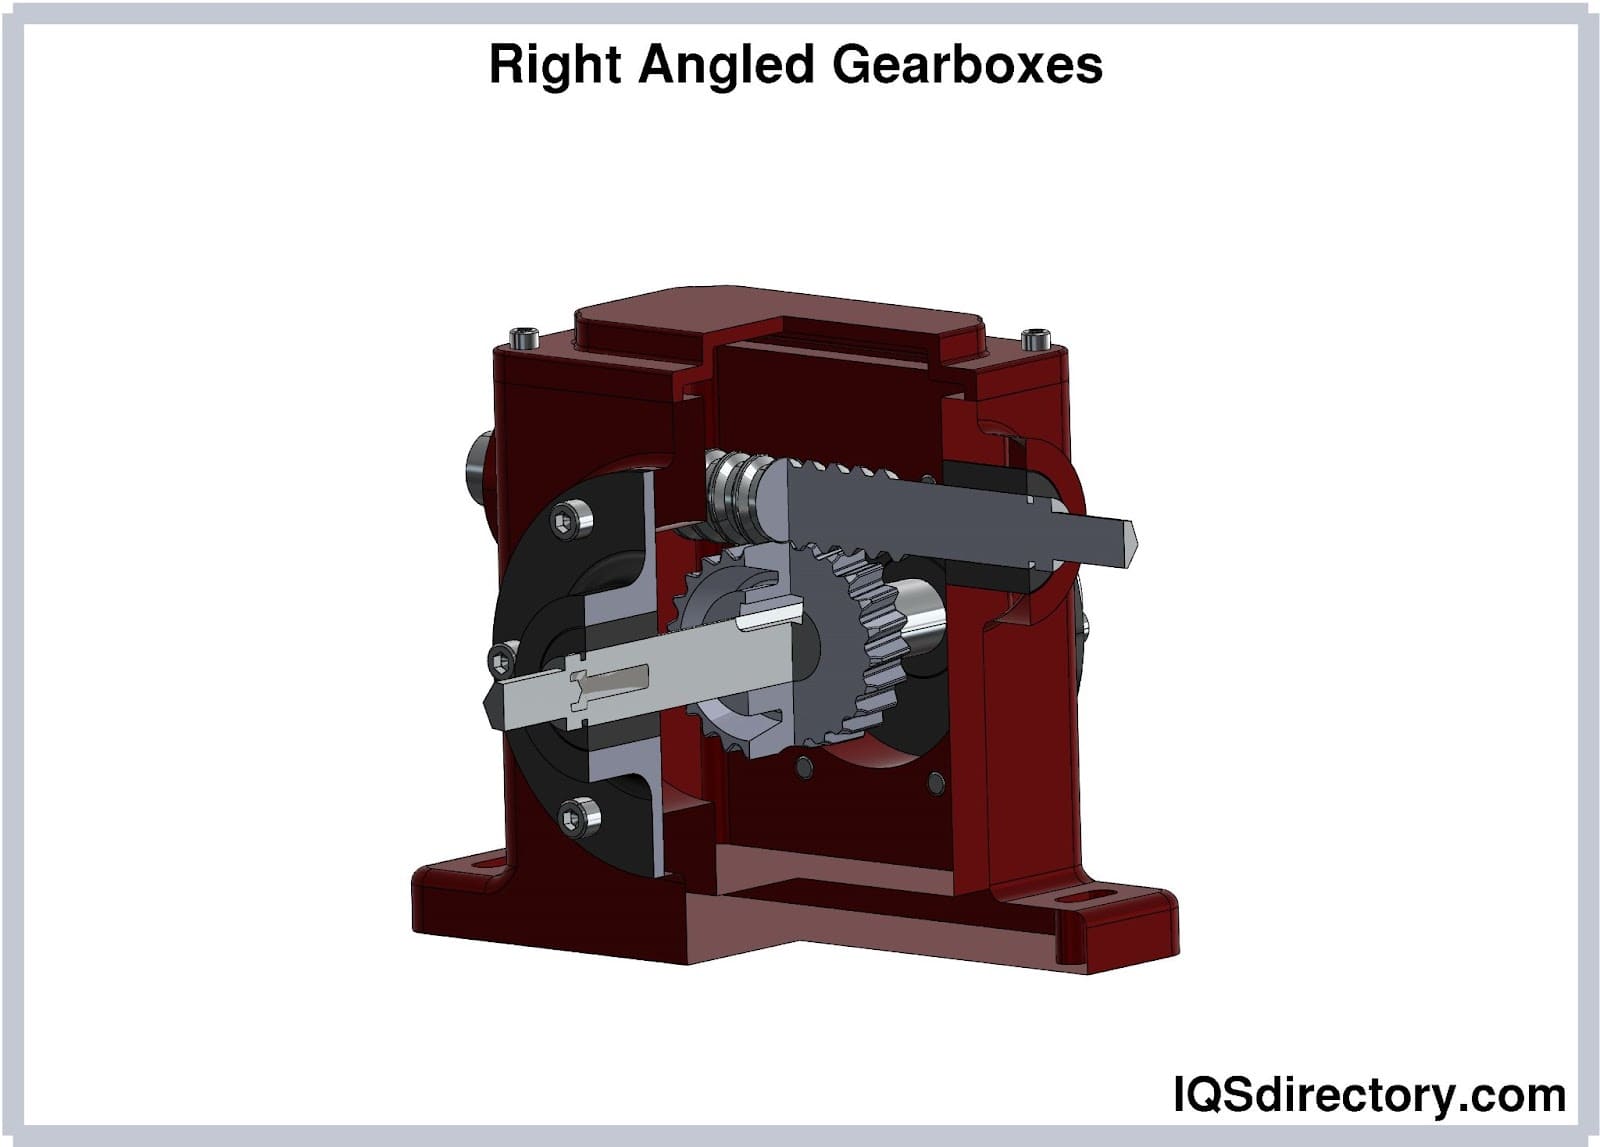 Right Angled Gearboxes